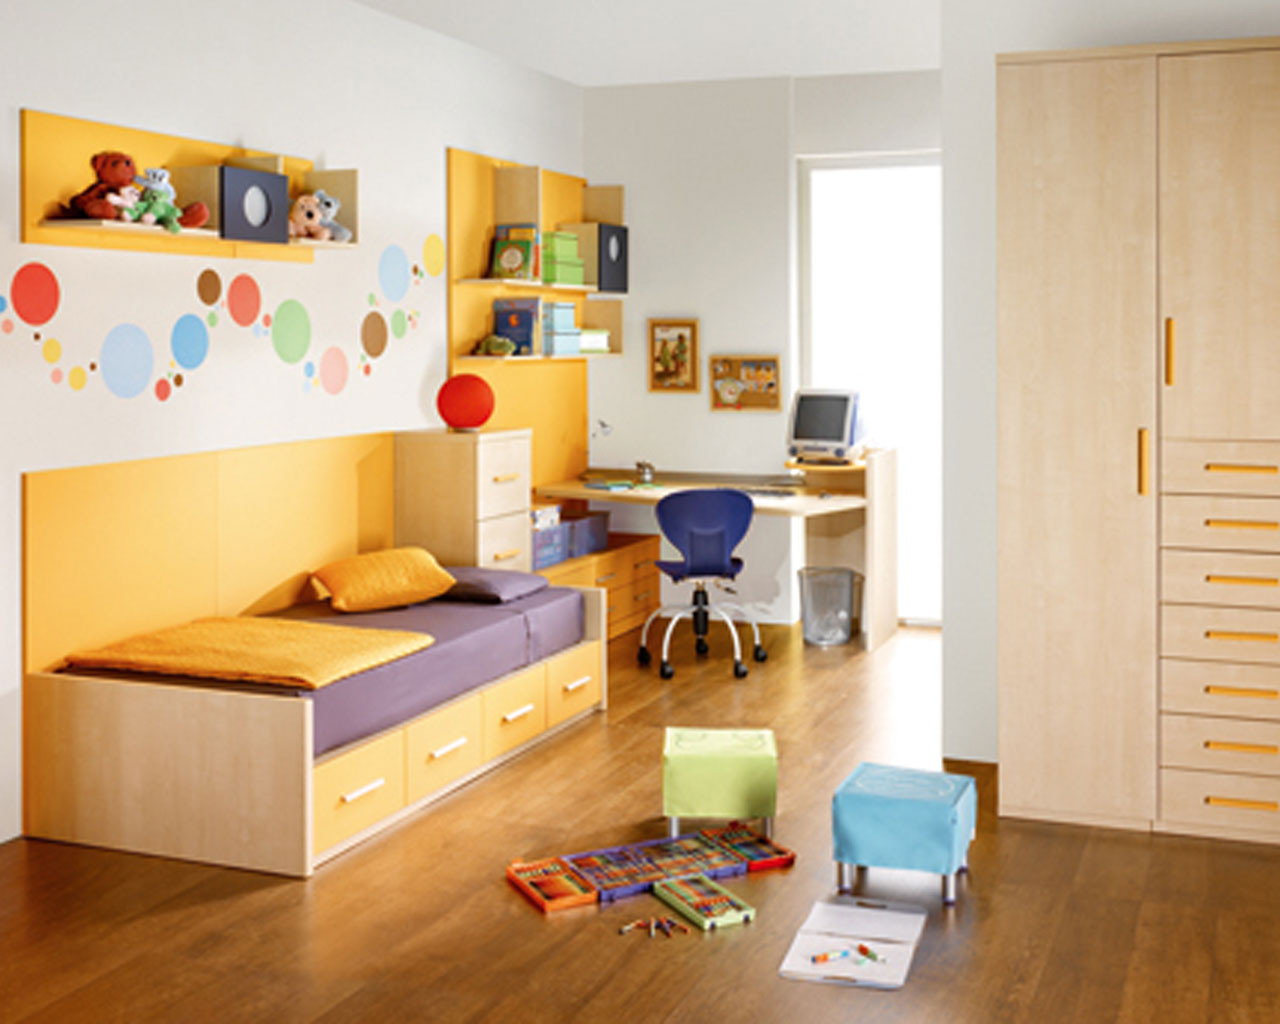 Kids Art Room Ideas
 Kids Room Decor and Design Ideas as the Easy yet Effective